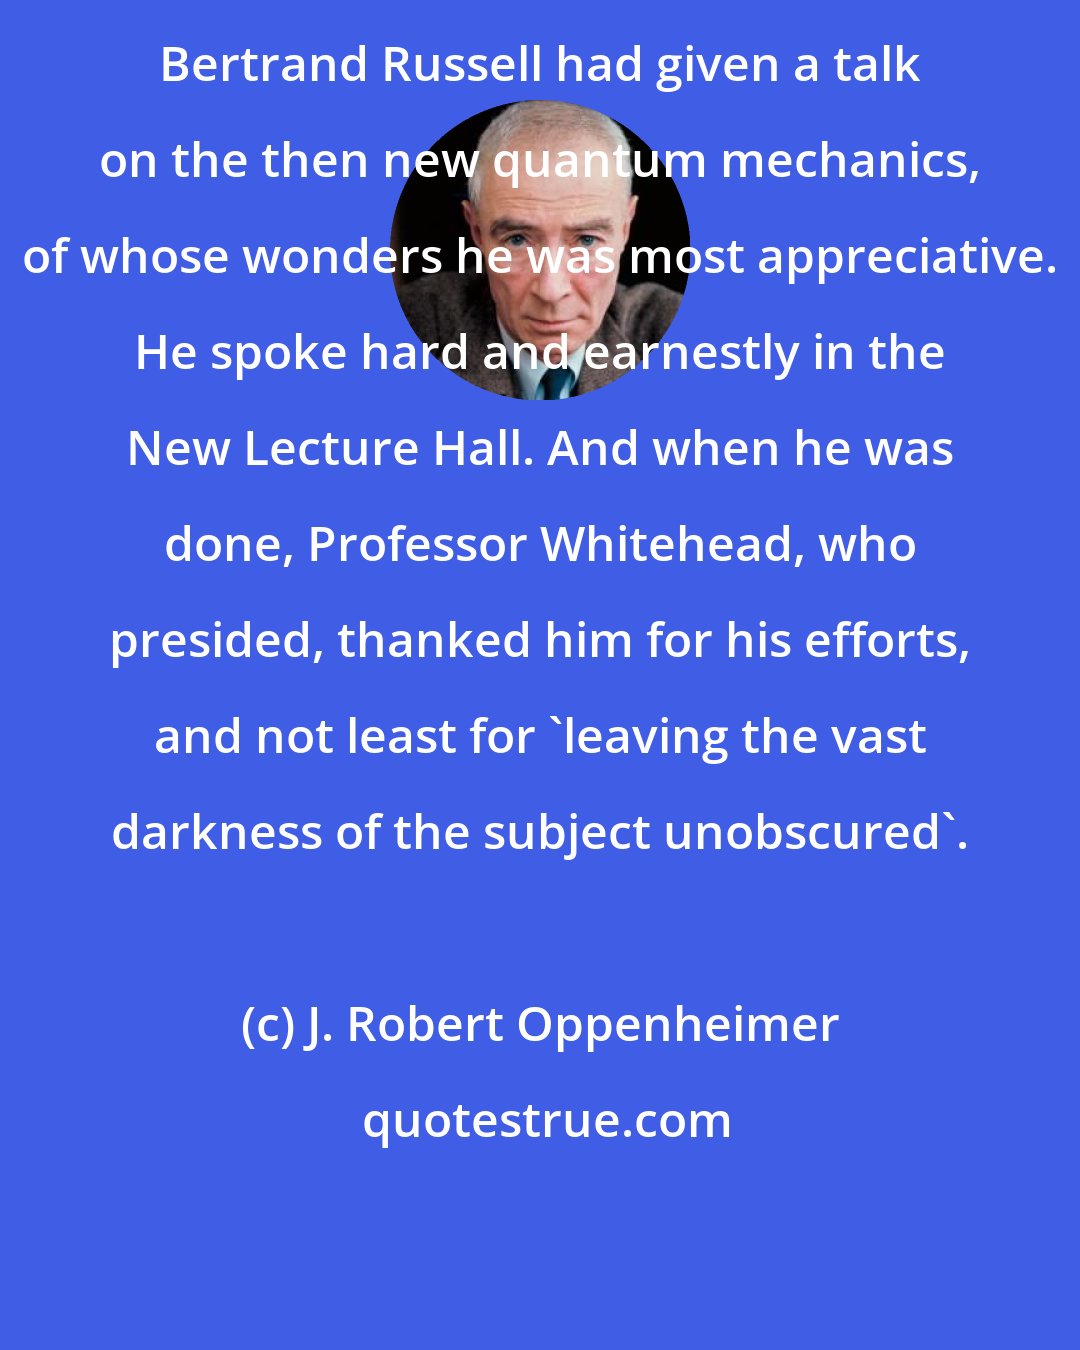 J. Robert Oppenheimer: Bertrand Russell had given a talk on the then new quantum mechanics, of whose wonders he was most appreciative. He spoke hard and earnestly in the New Lecture Hall. And when he was done, Professor Whitehead, who presided, thanked him for his efforts, and not least for 'leaving the vast darkness of the subject unobscured'.